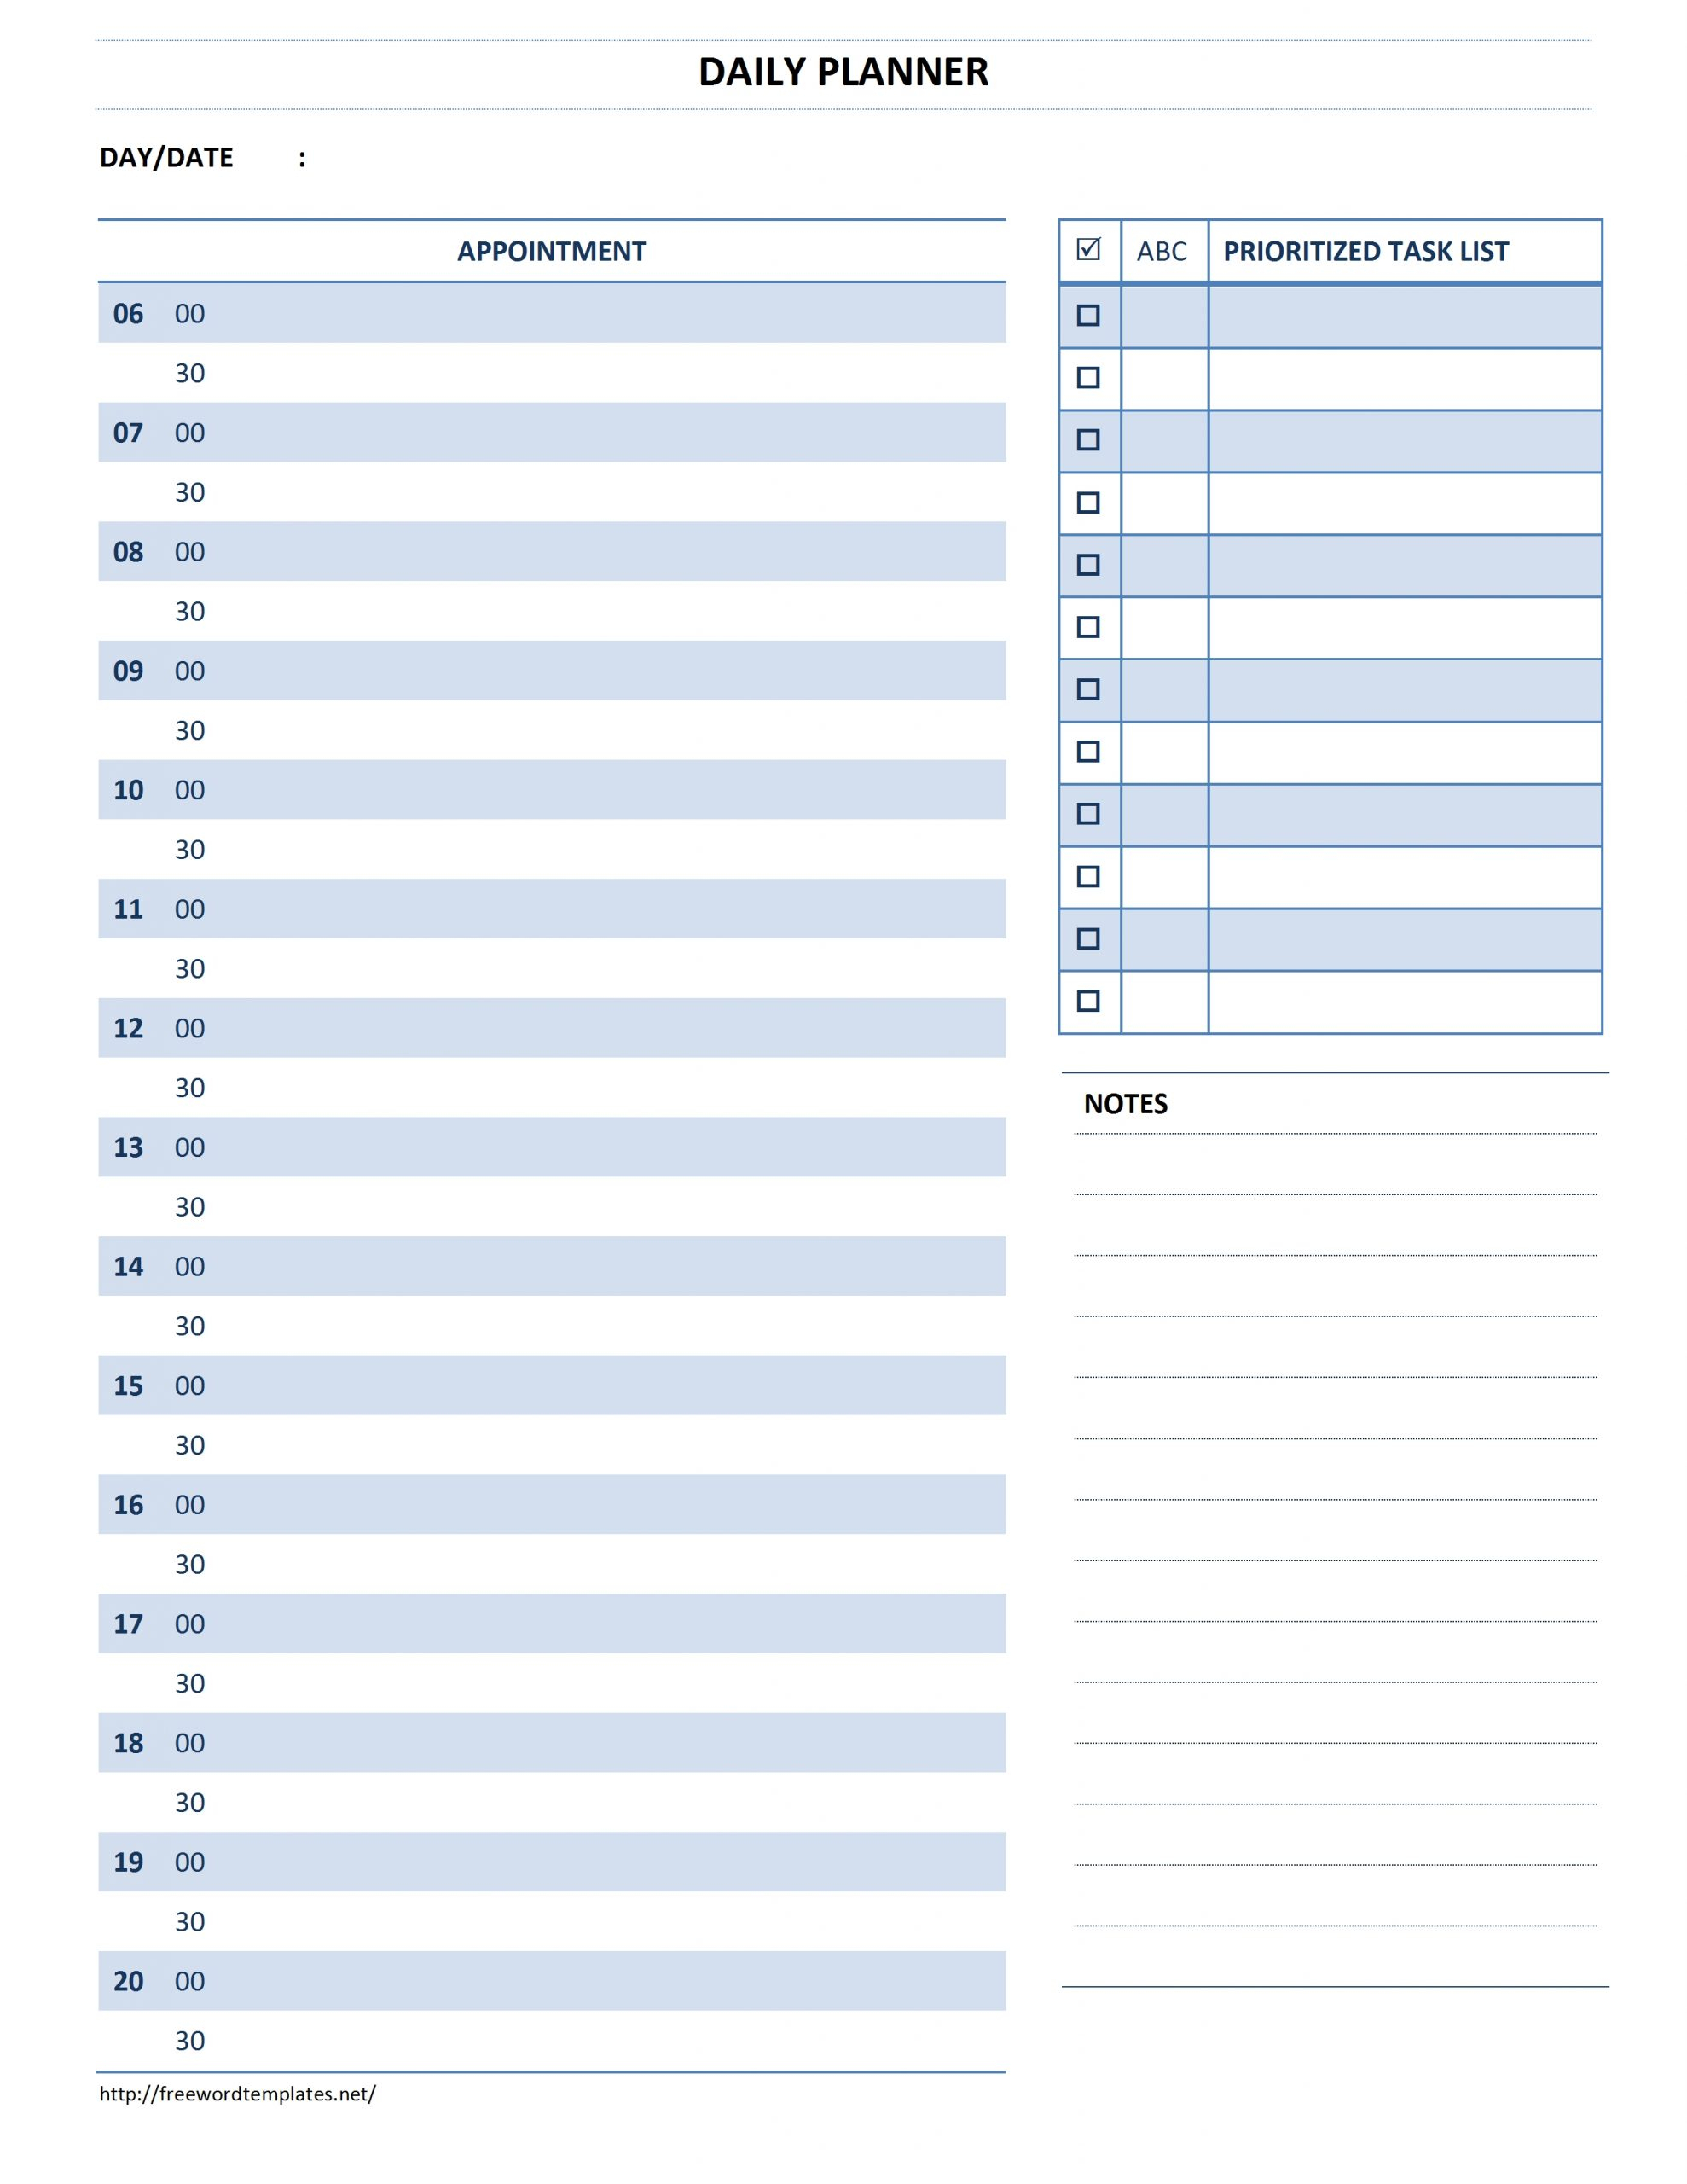 Daily Calendar Excel Plate Free Printable Monthly Schedule in Daily Calendar Template 30 Minute Increments